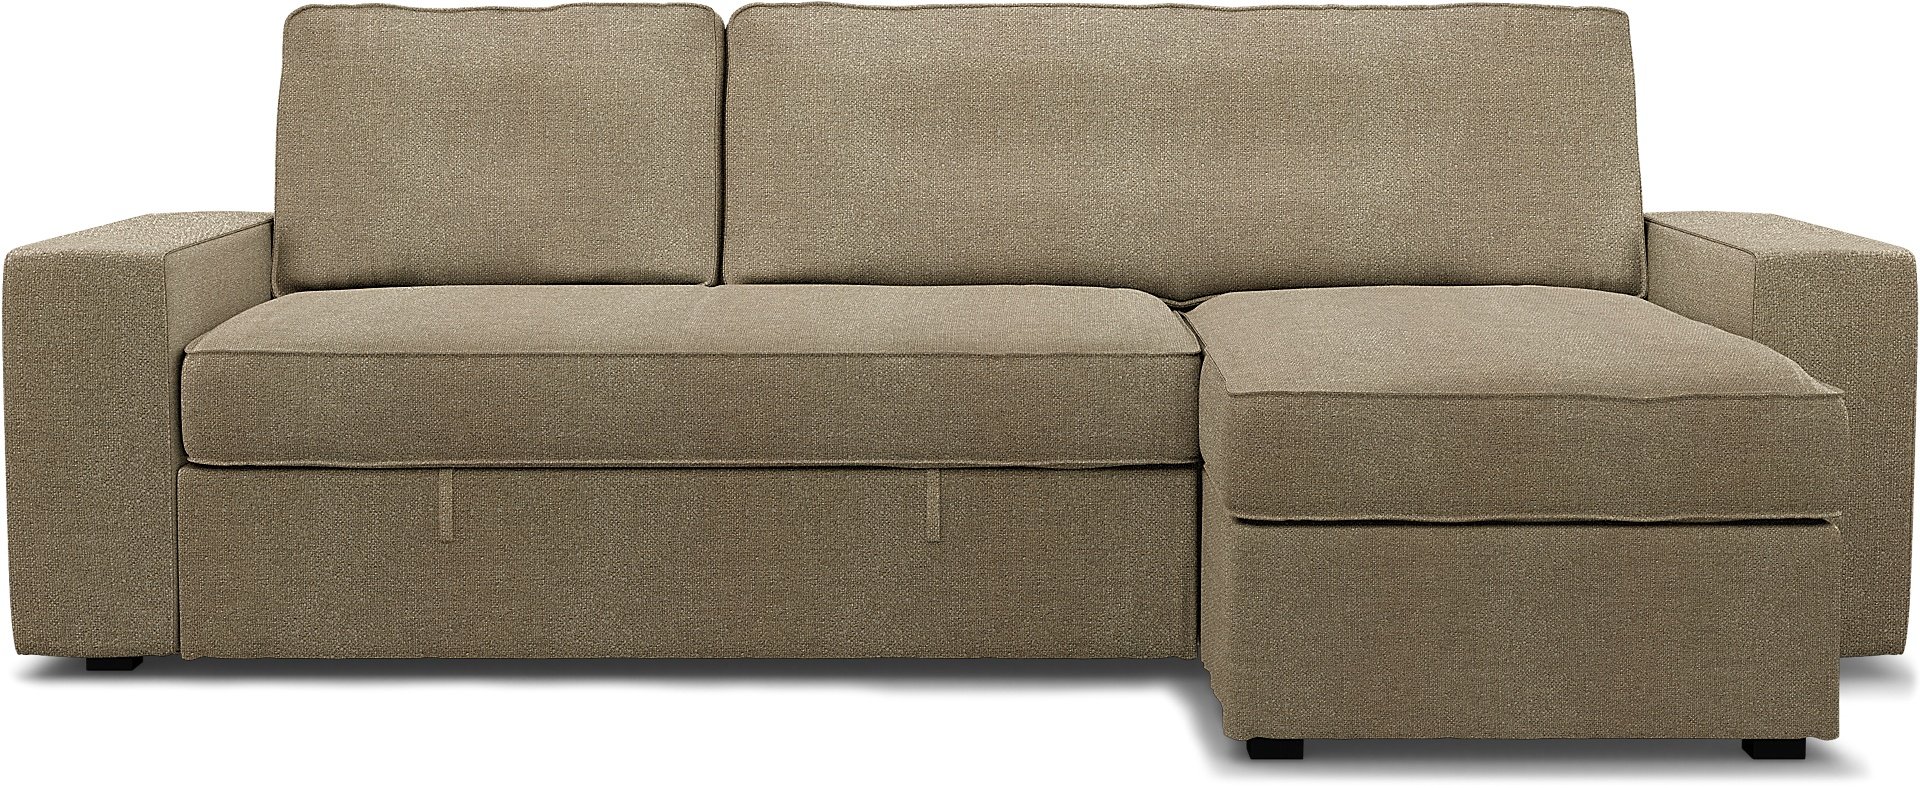 IKEA - Vilasund sofa bed with chaise cover, Pebble, Boucle & Texture - Bemz